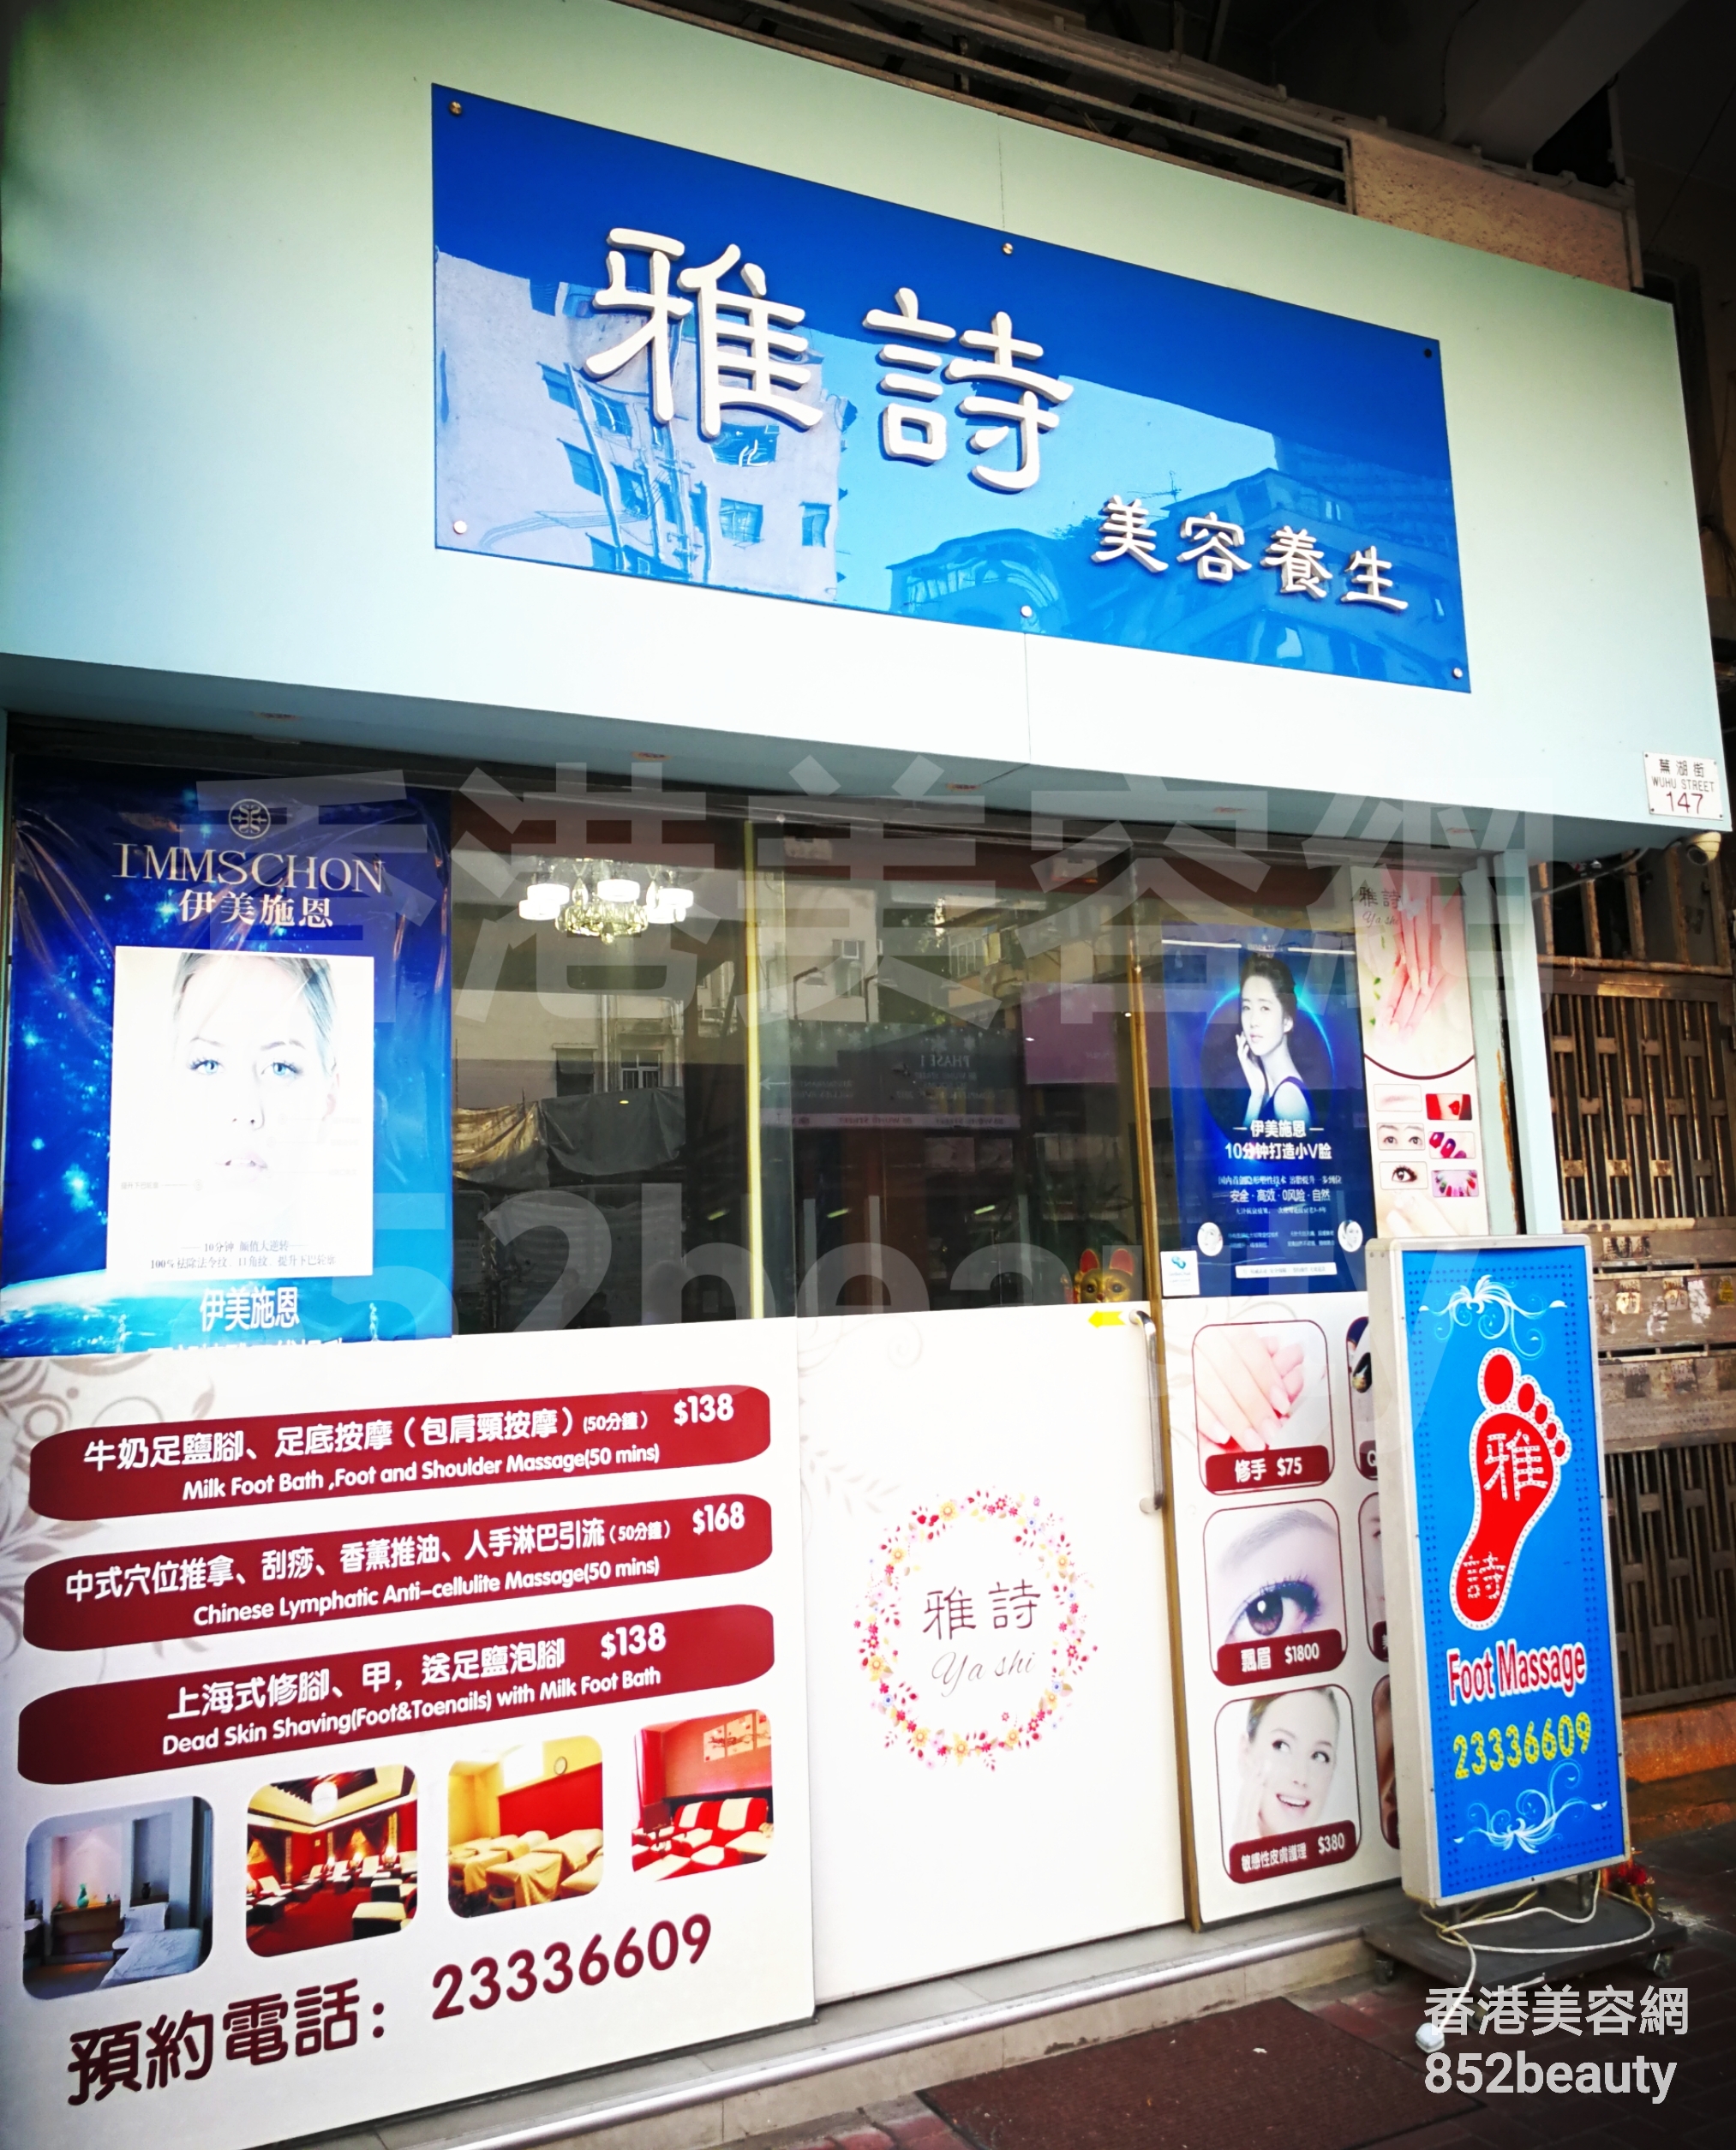 Hand and foot care: 雅詩美容養生